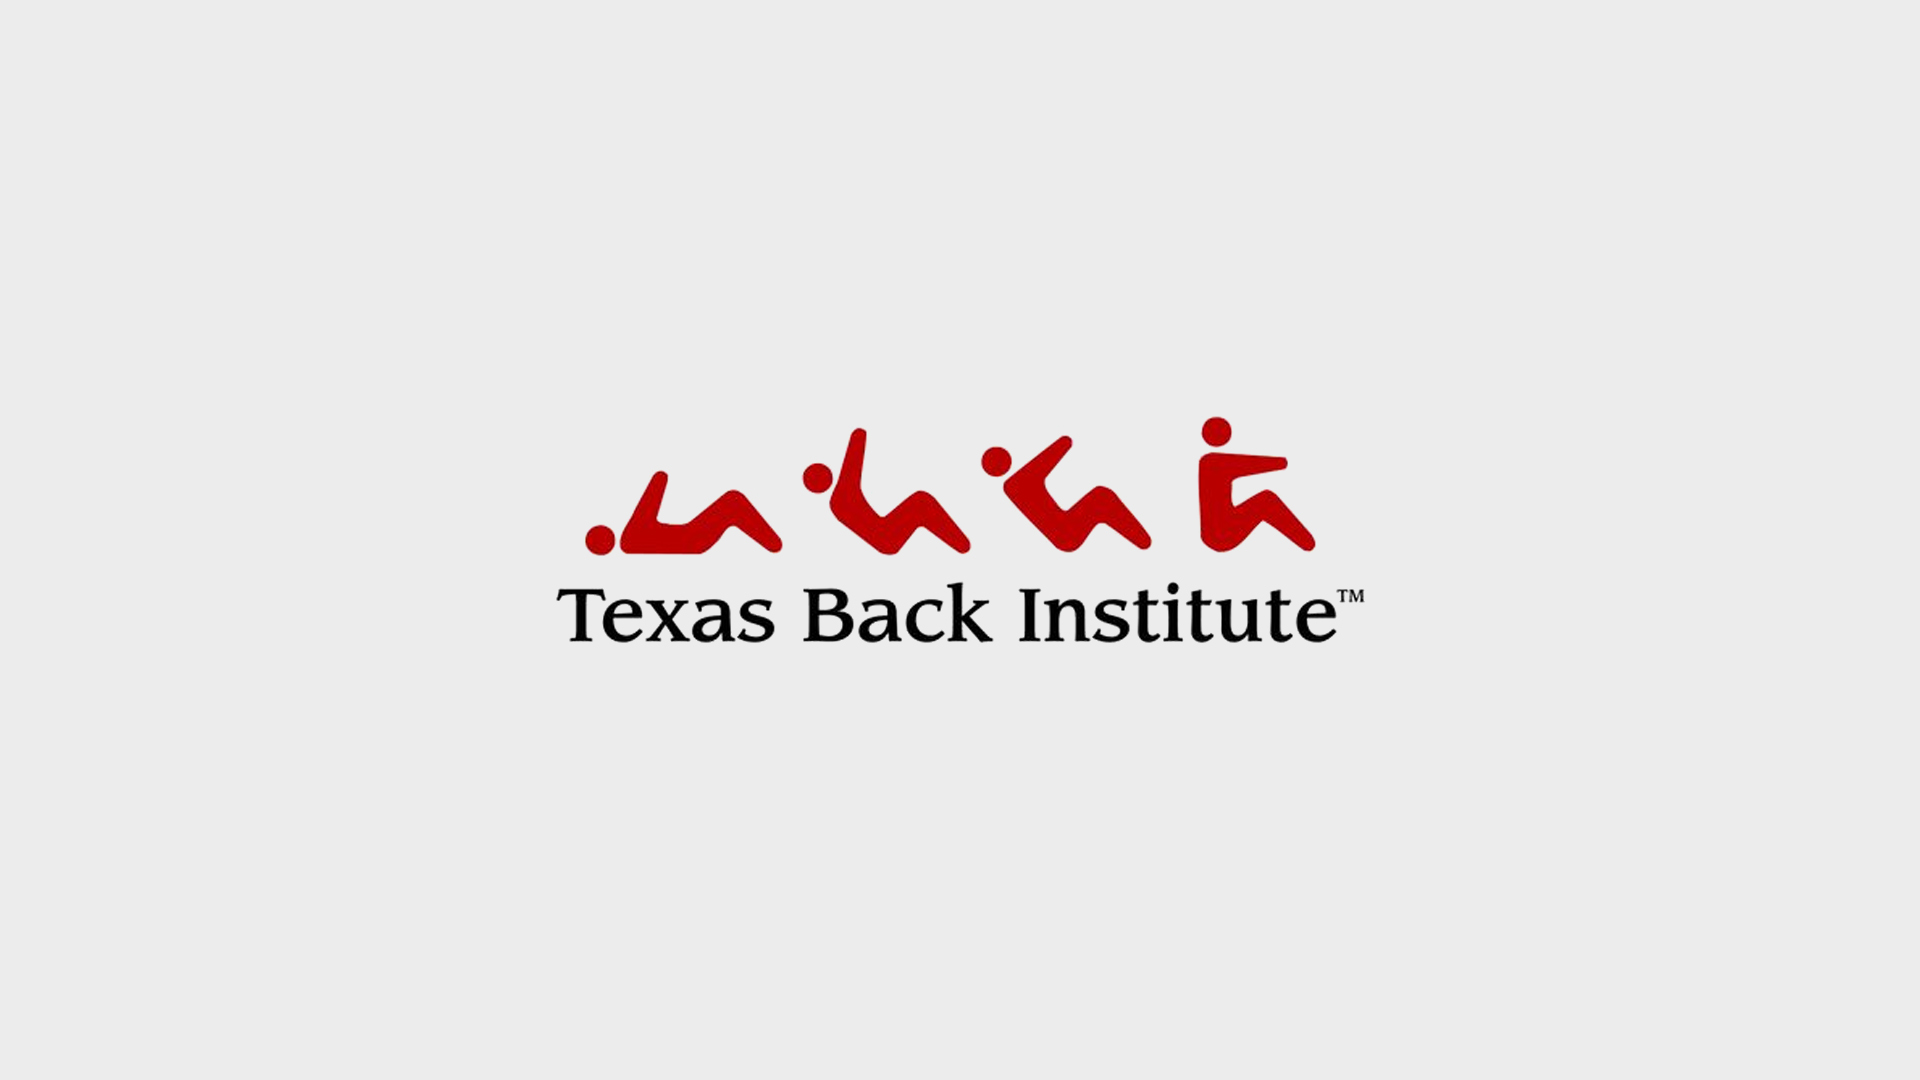 Texas Health Plano, Texas Back Institute offer SpineAssist® surgical robot for spine surgeries